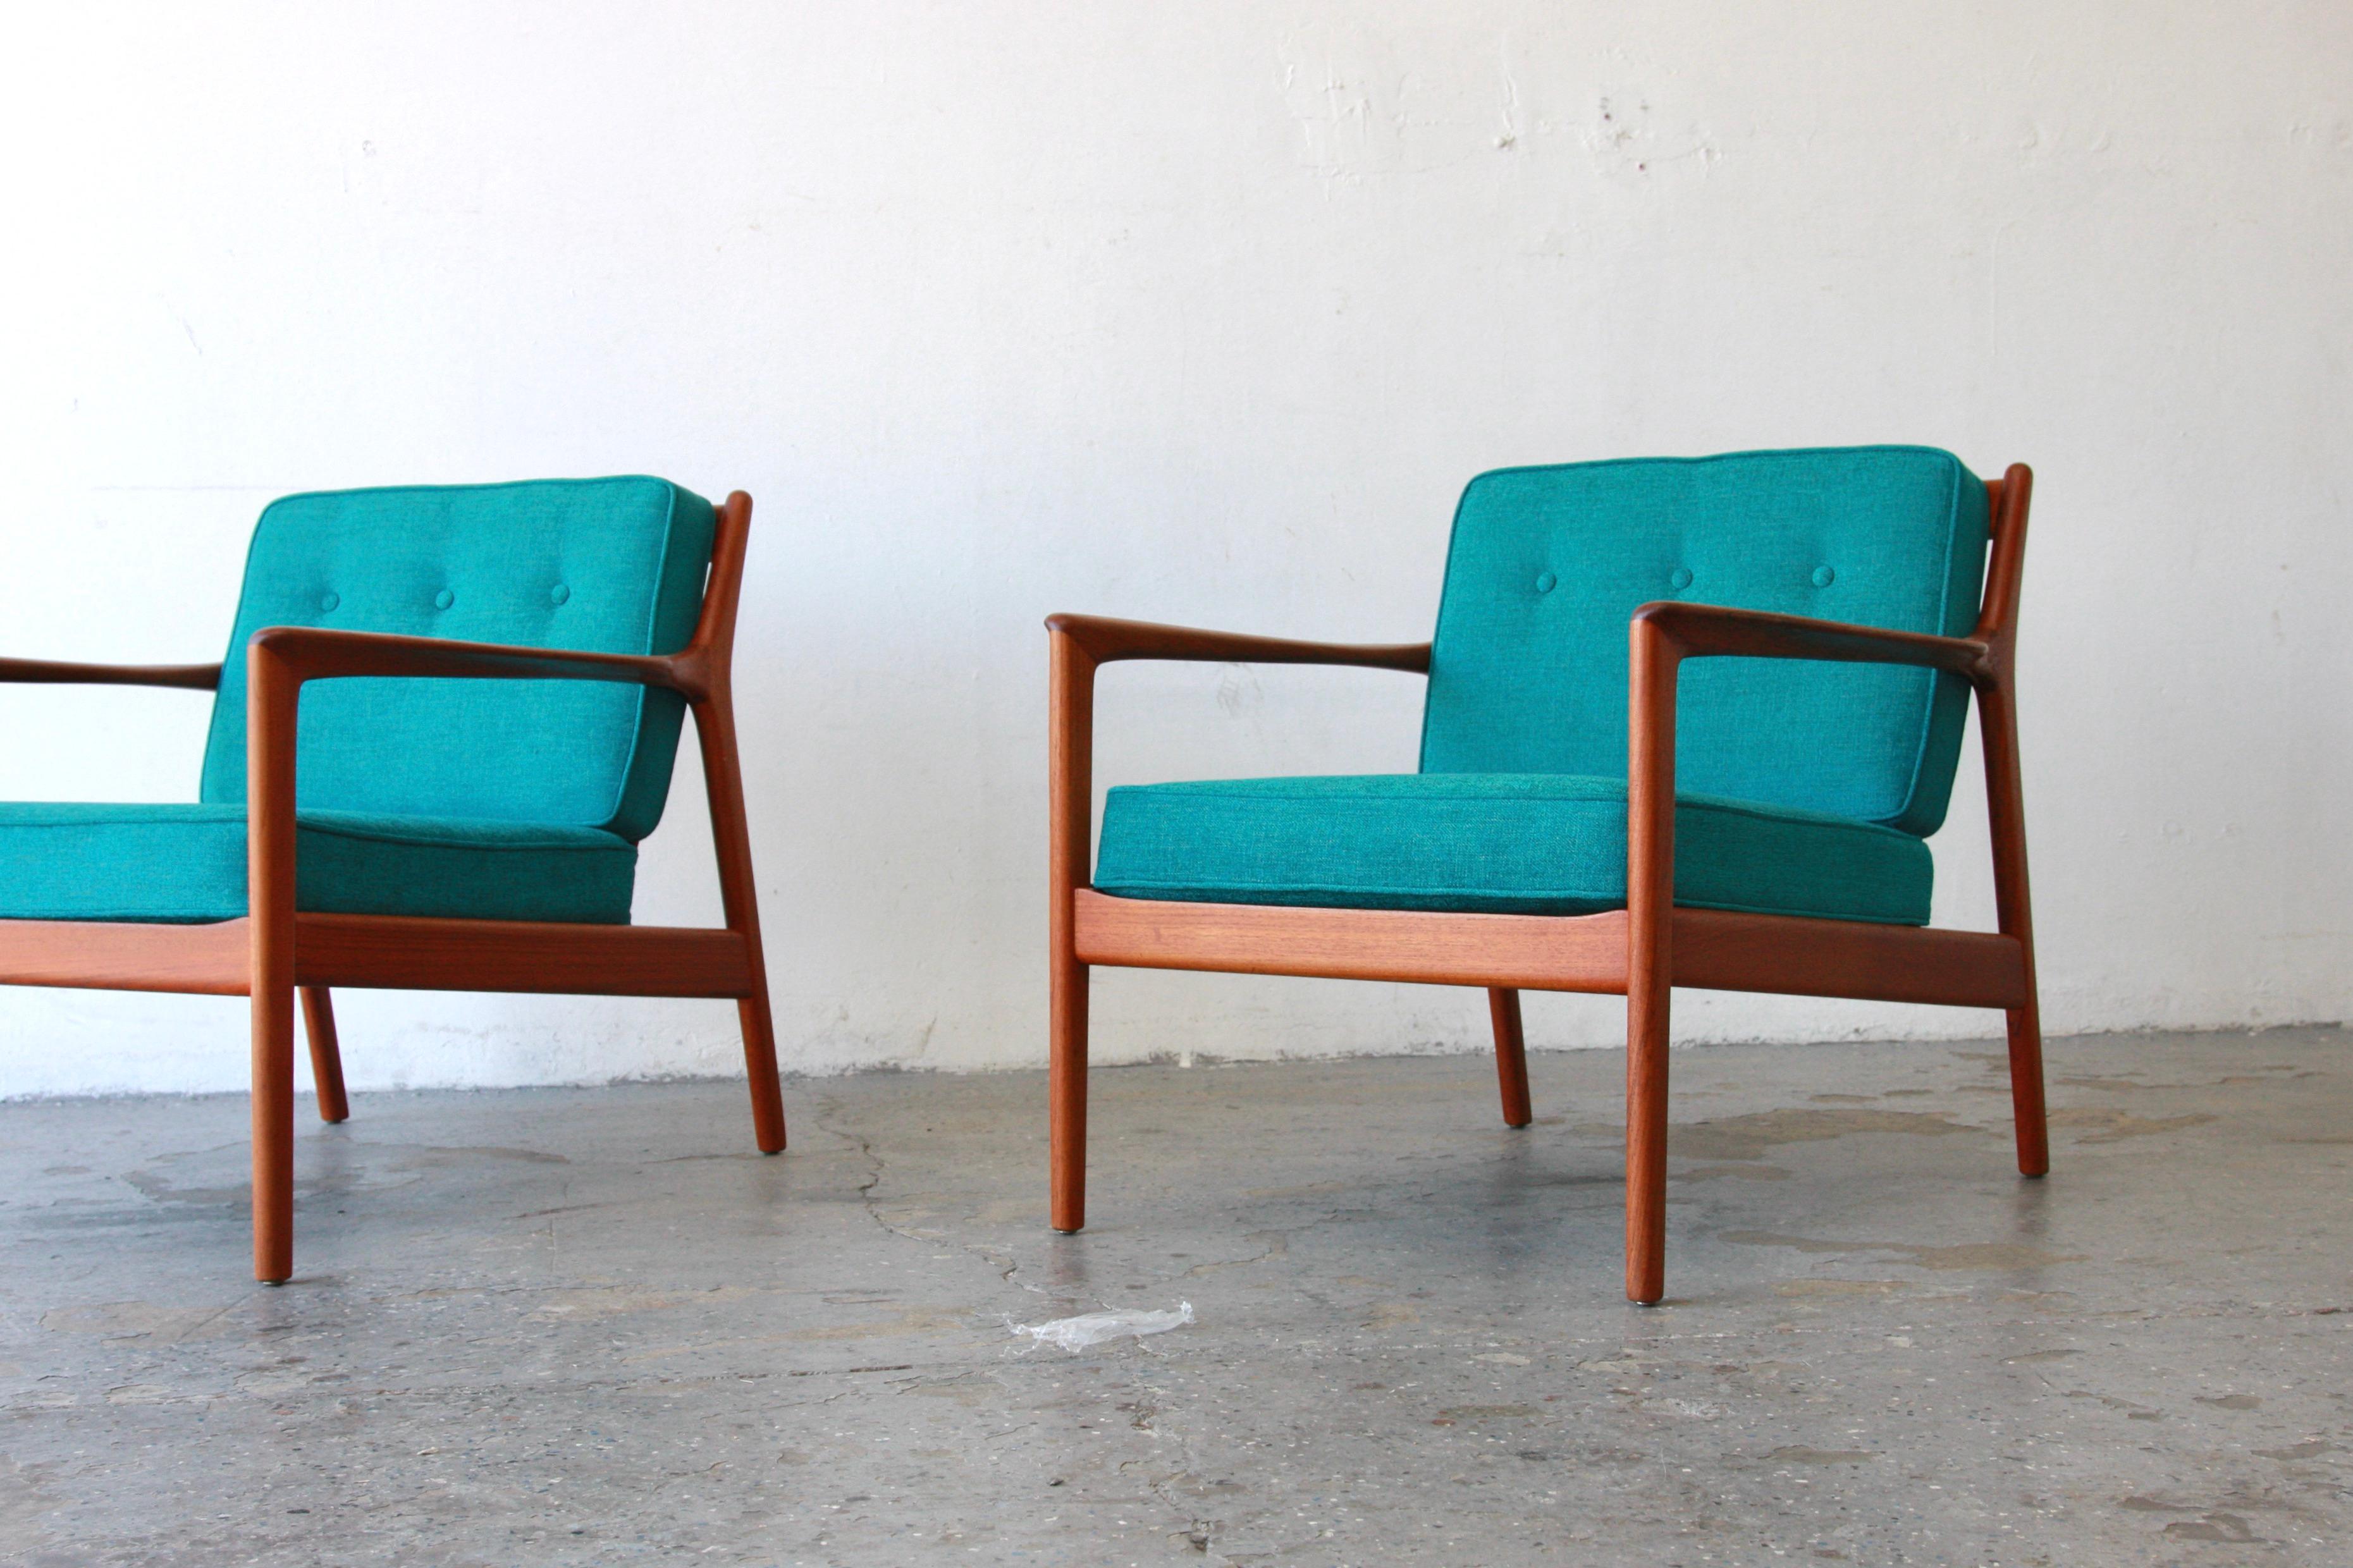 Pair of Danish Modern Dux  USA75 Chairs designed by Folke Ohlsson Sweden 
Pair of USA 75 model armchairs in teak by Swedish designer Folke Ohlsson. The design of these armchairs is distinguished by a very taut line of the armrests and the rear legs